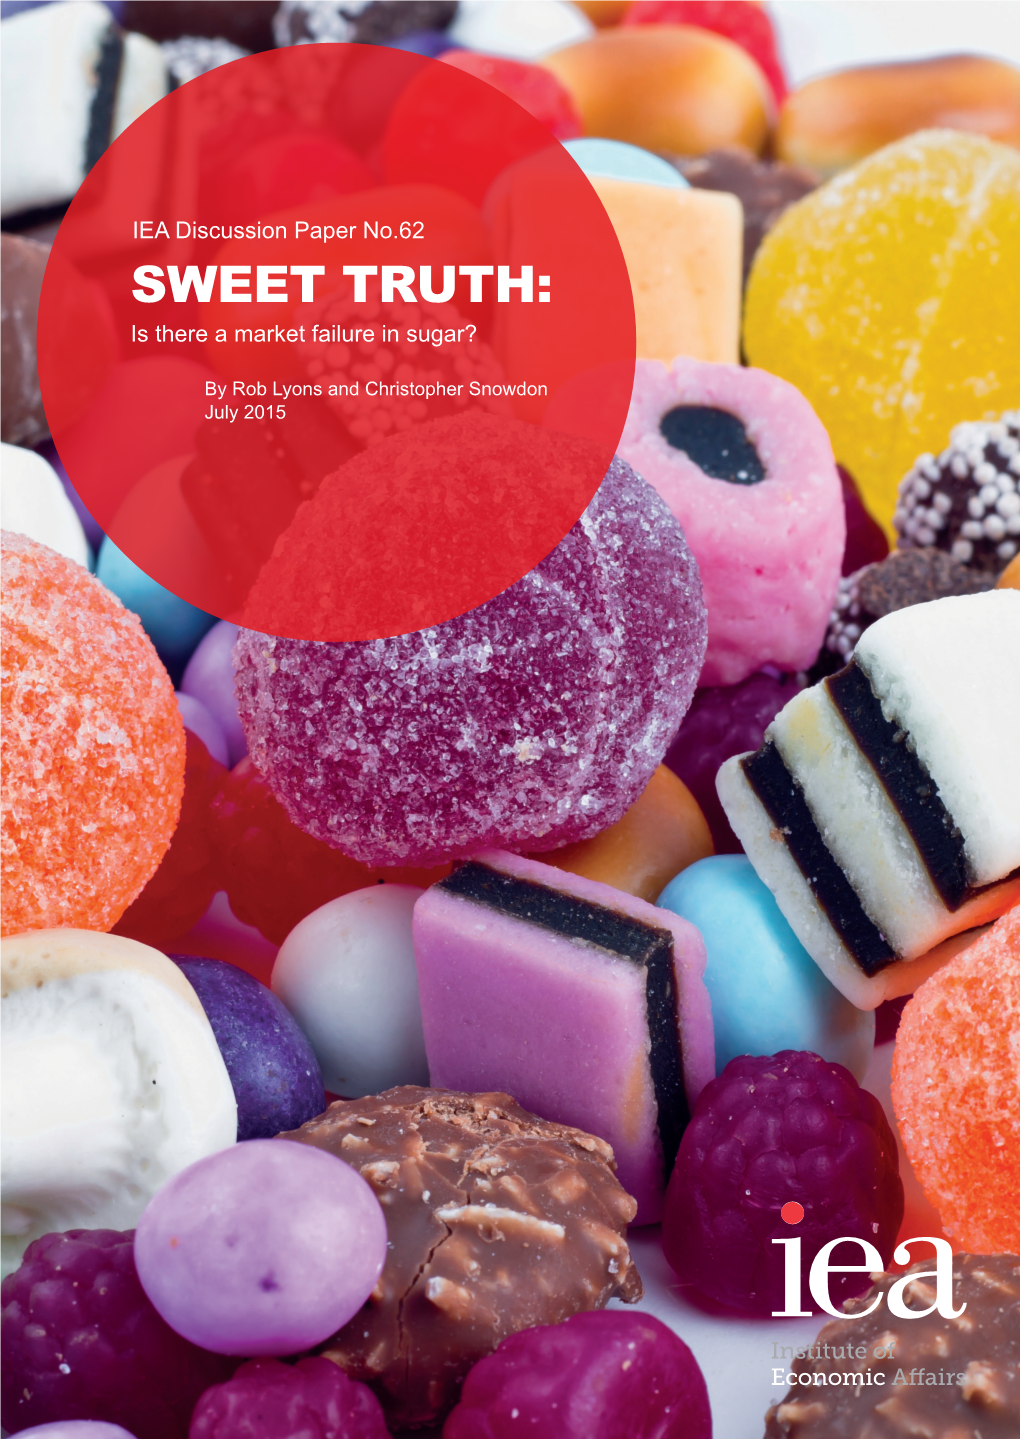 SWEET TRUTH: Is There a Market Failure in Sugar?